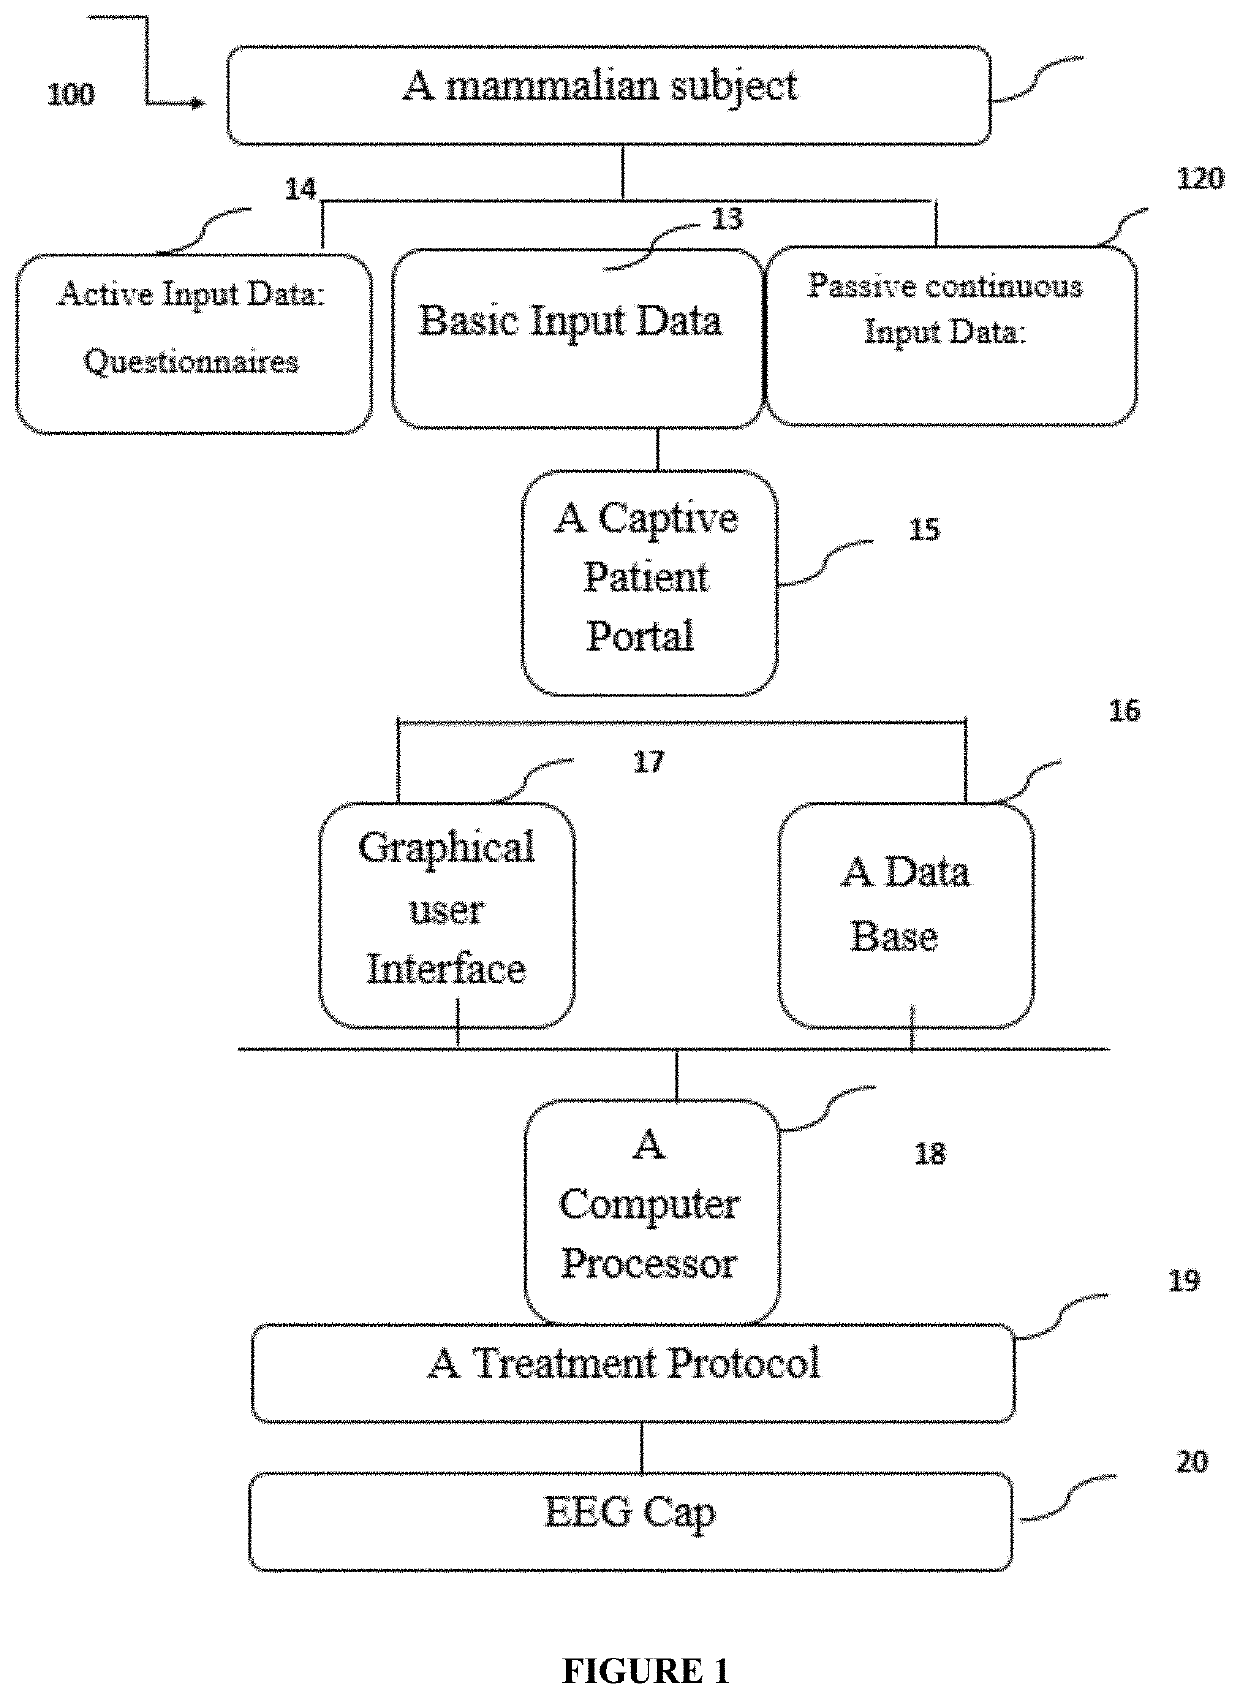 Means and methods for personalized behavioral health assessment system and treatment